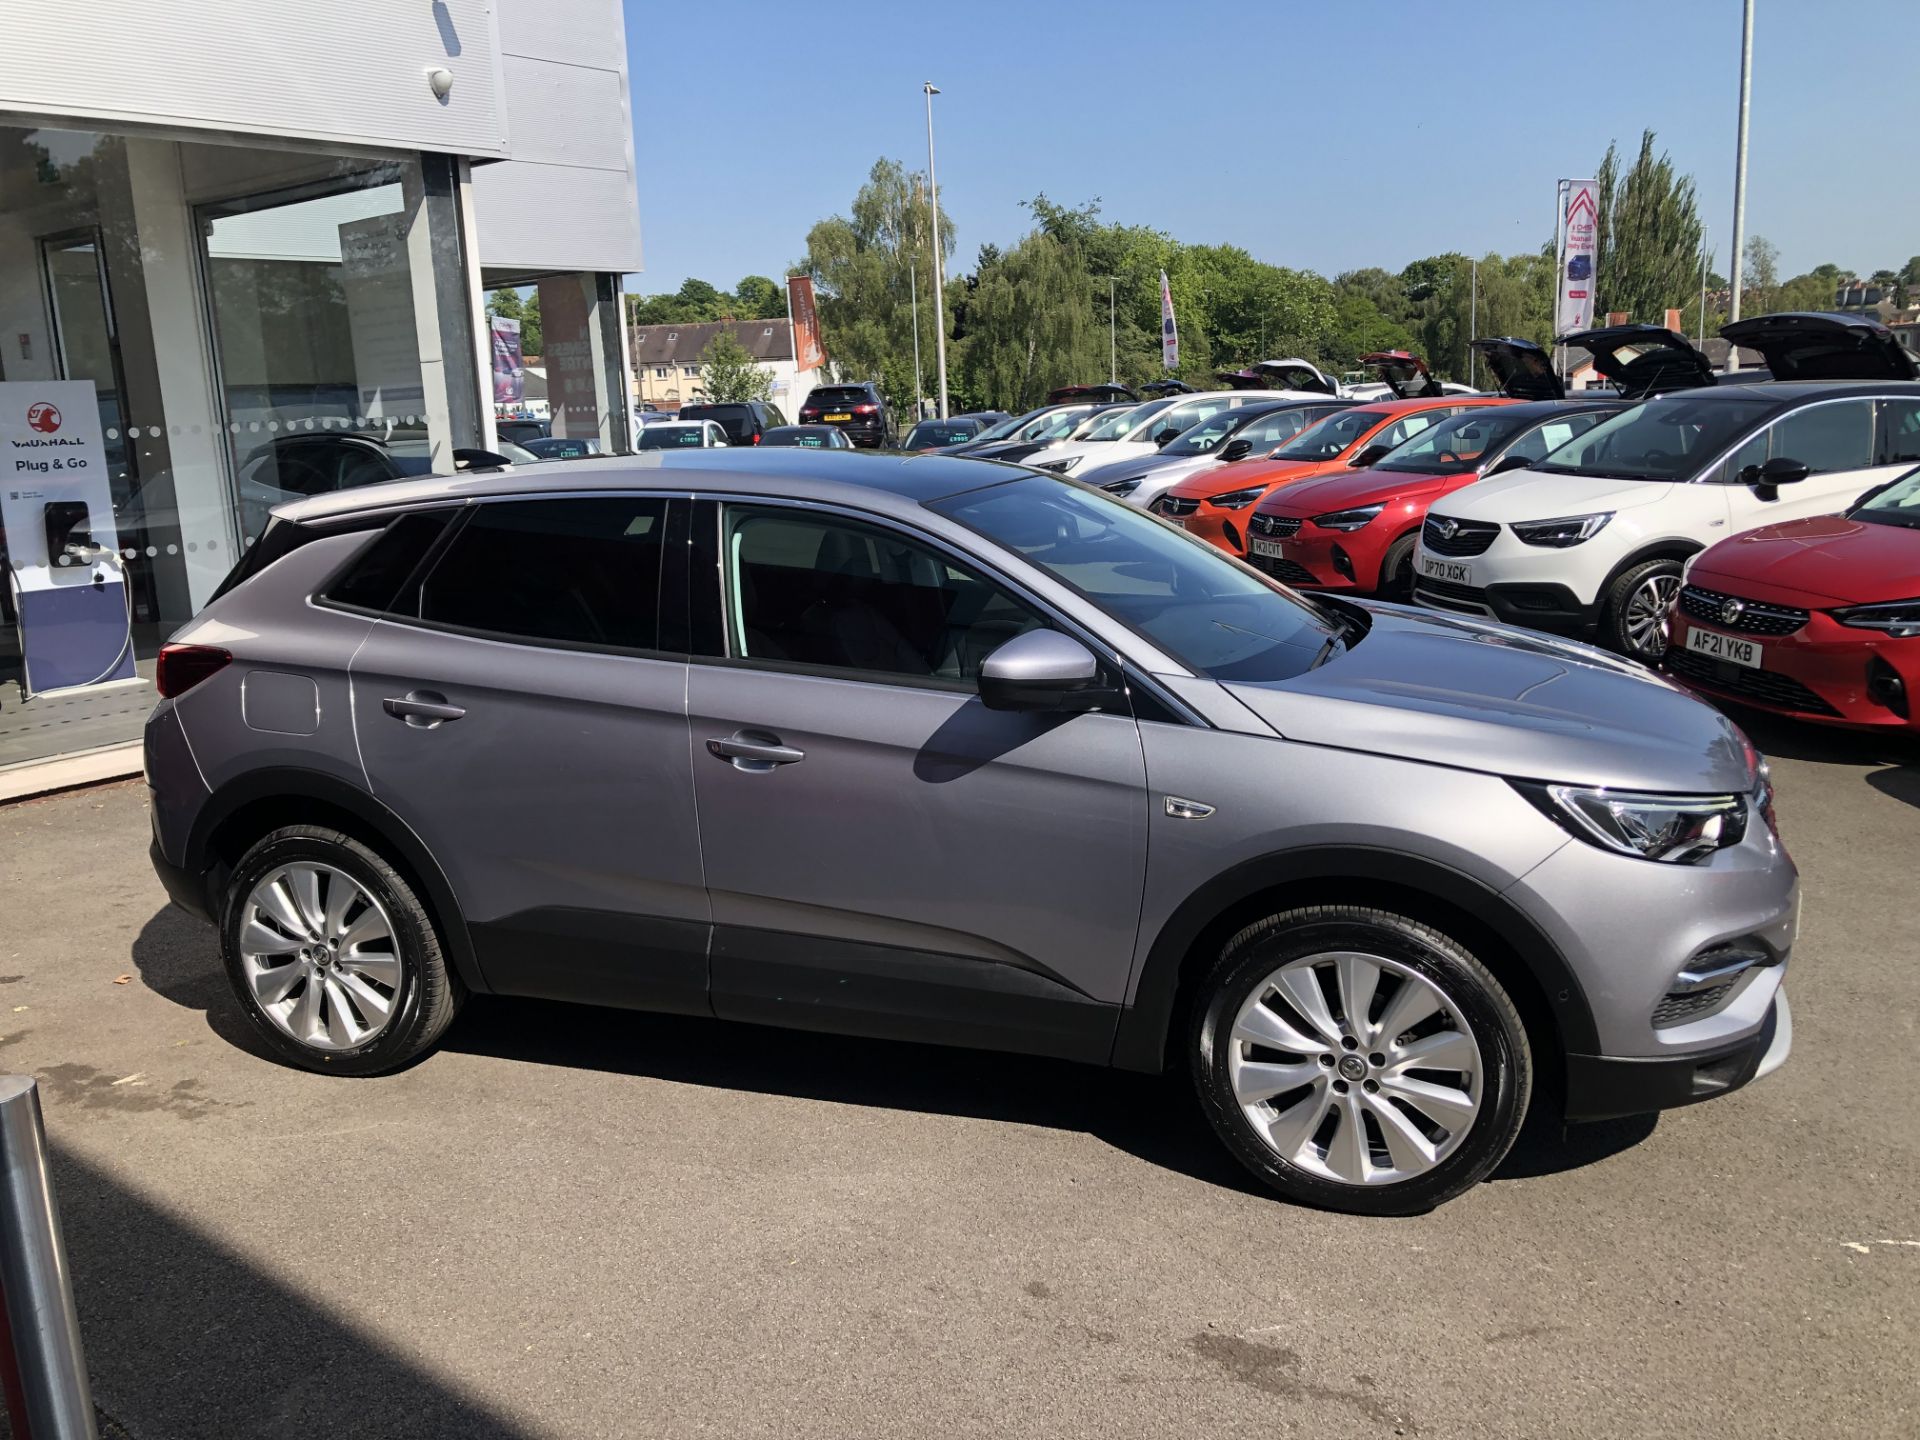 Vauxhall Grandland X 1.2T (130ps) Elite Nav 5dr Automatic, Registration: DS20EUO, Date First - Image 2 of 8